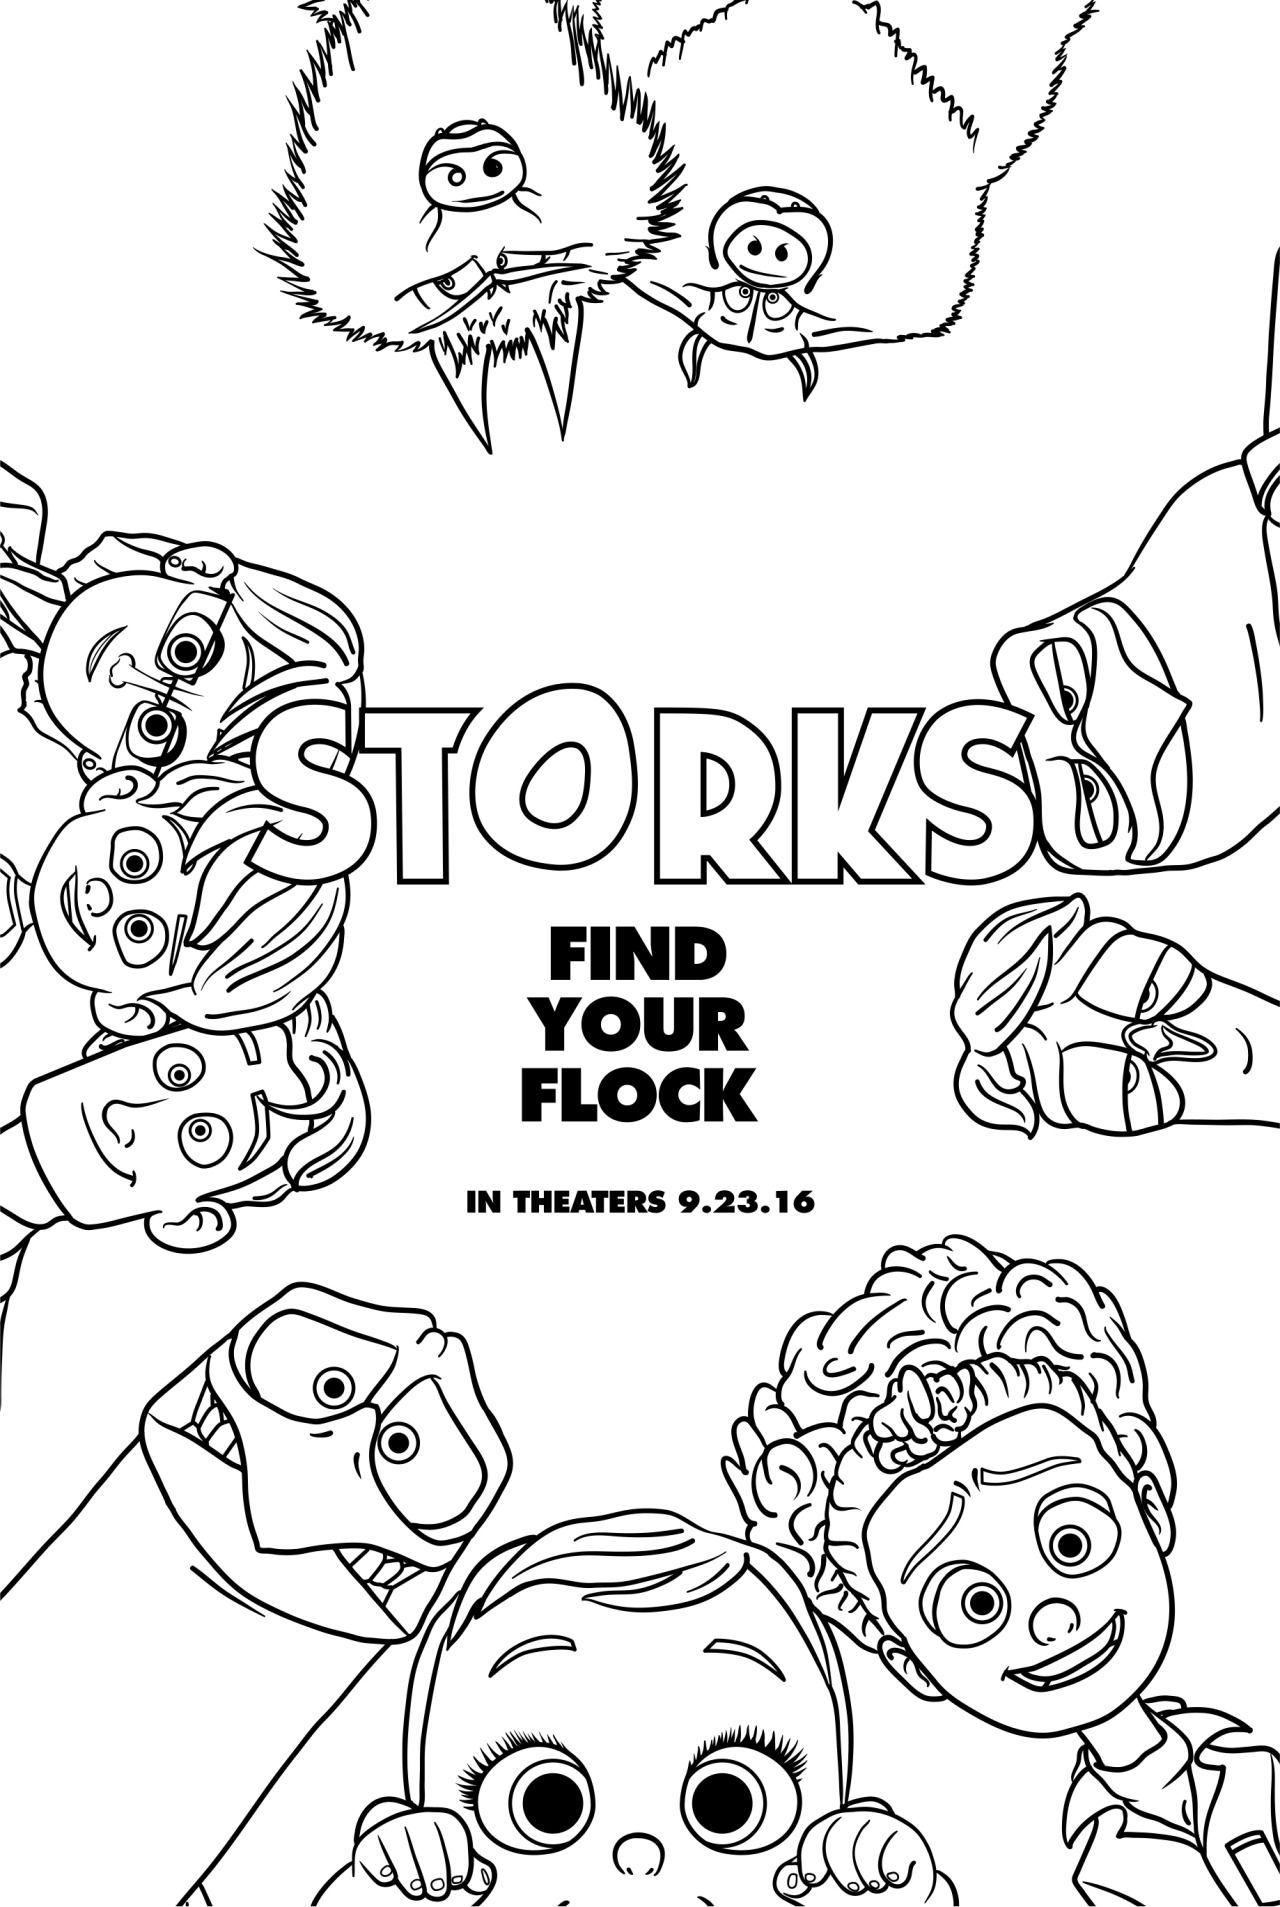 Storks — We could use your coloring expertise! Color in...